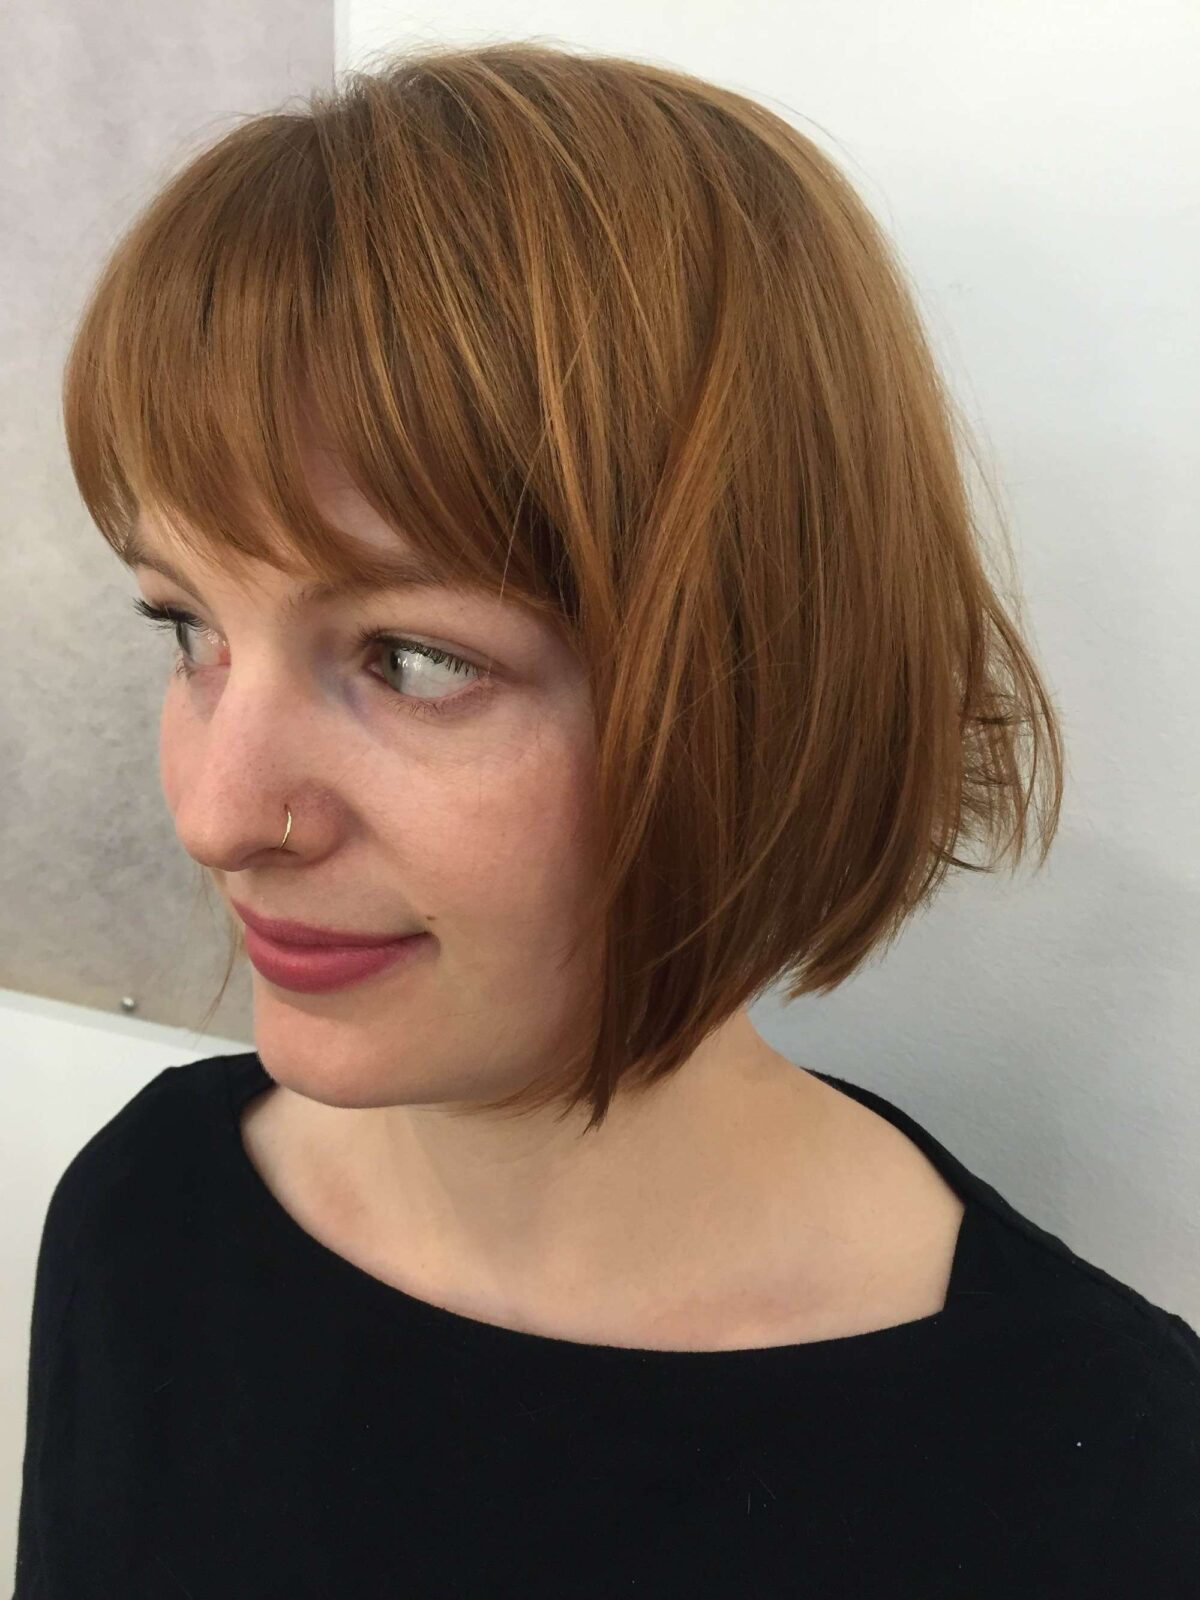 4 Things to Know About Cutting Your Red Hair Short